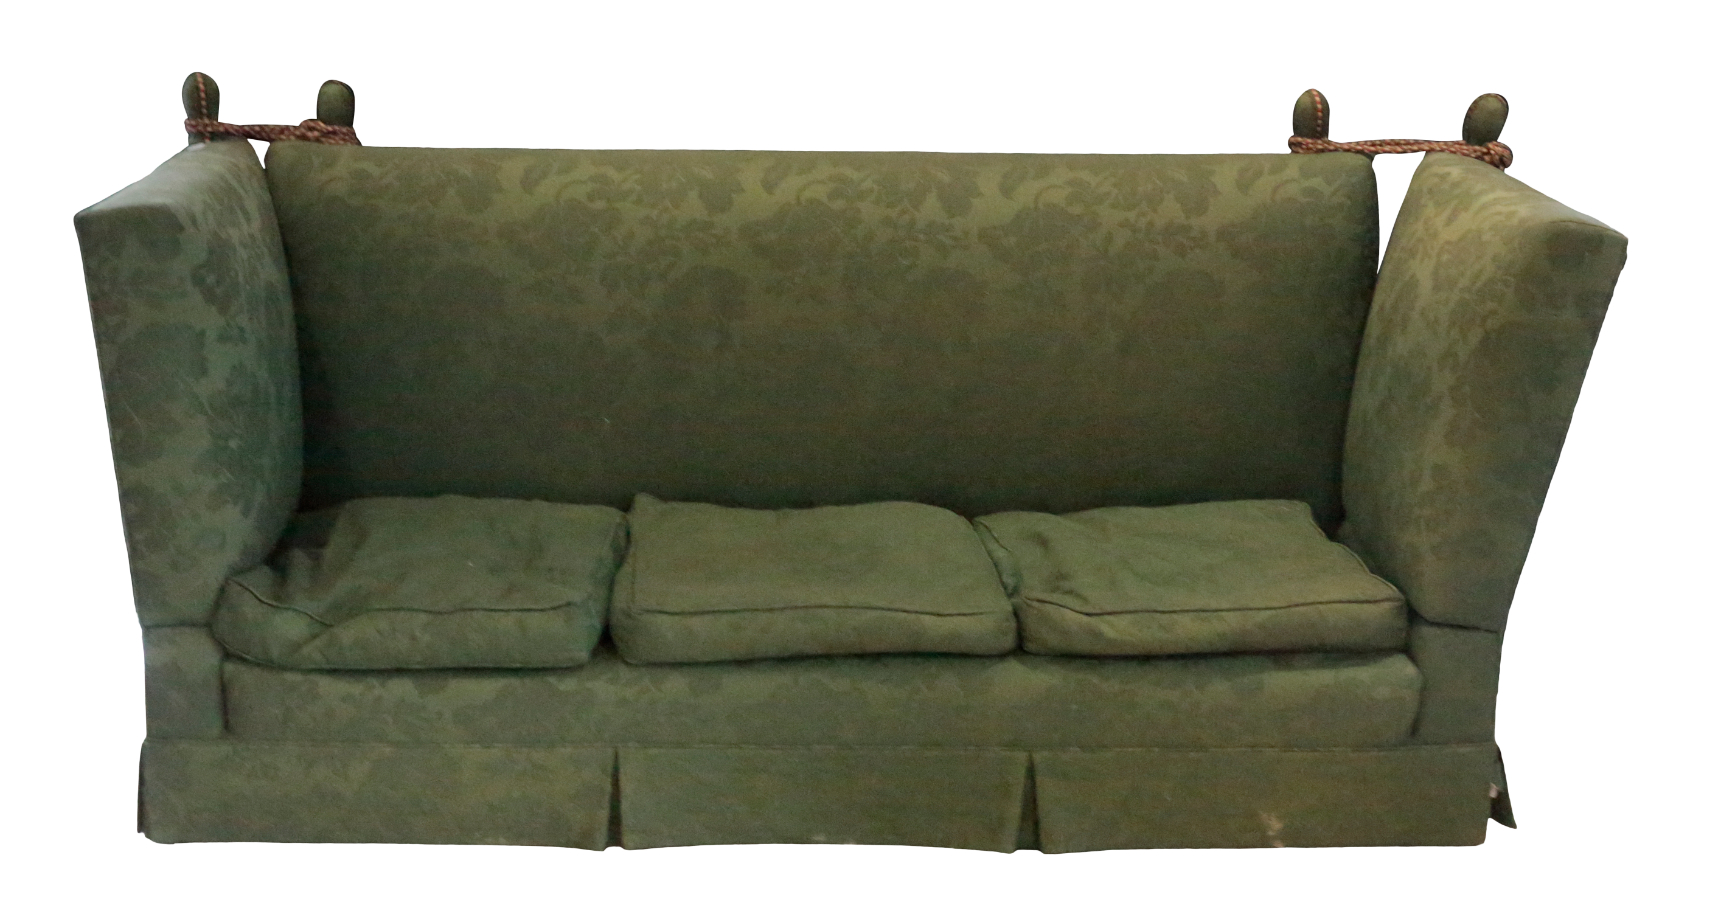 A KNOLE SOFA with green damask covers,